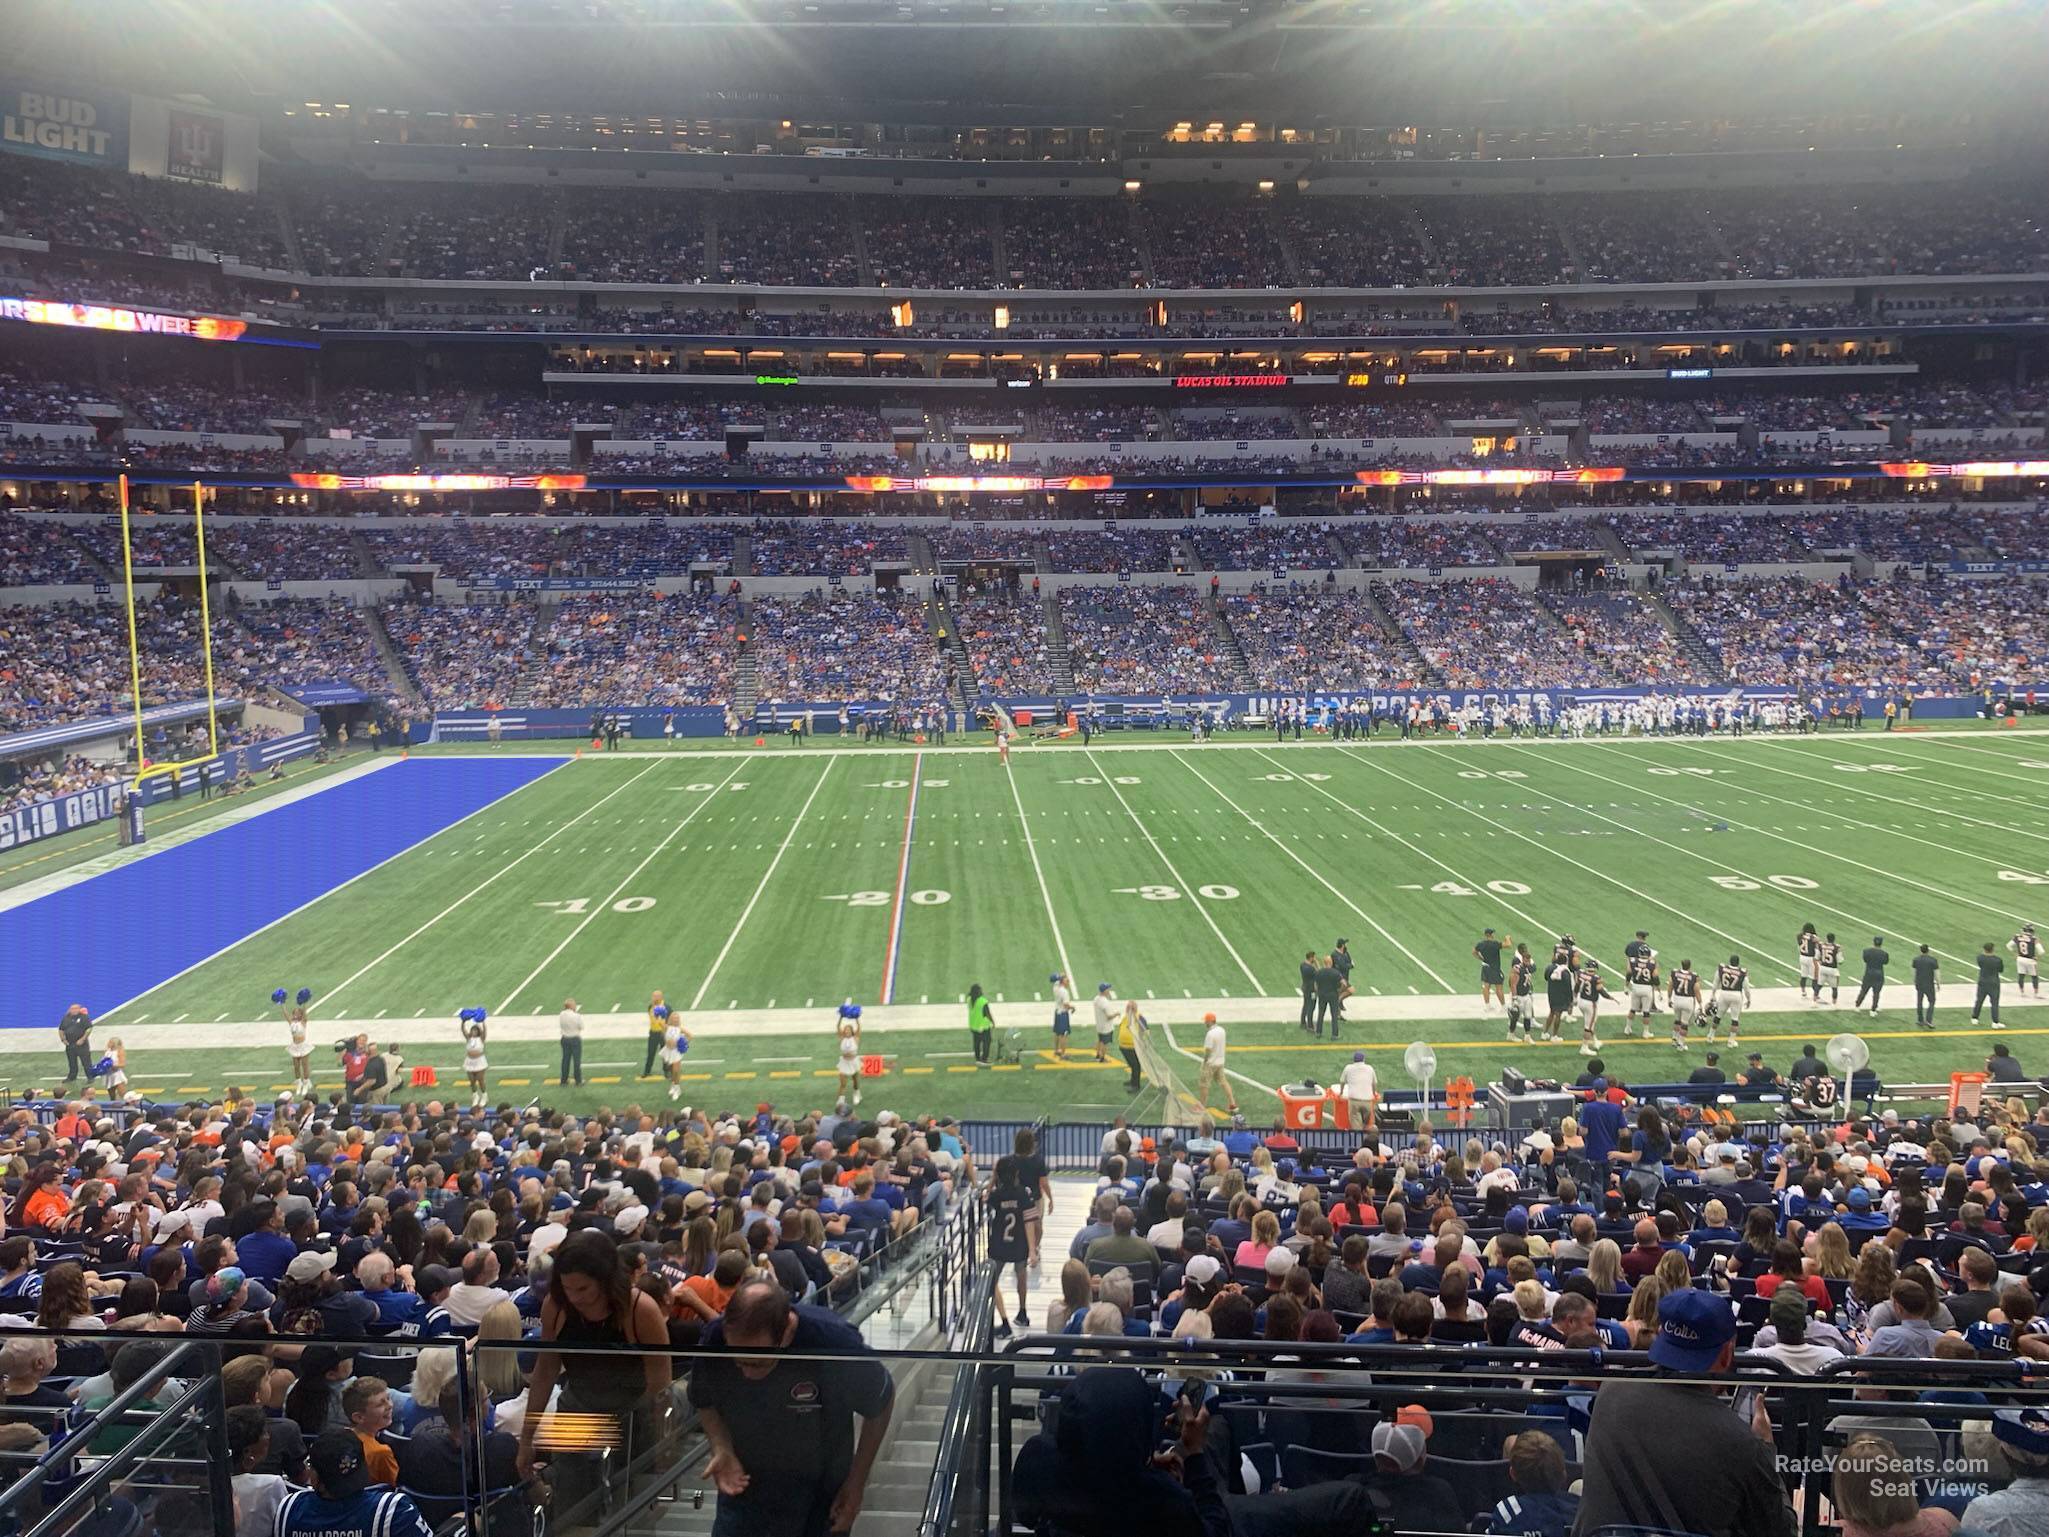 section 215, row 1 seat view  for football - lucas oil stadium